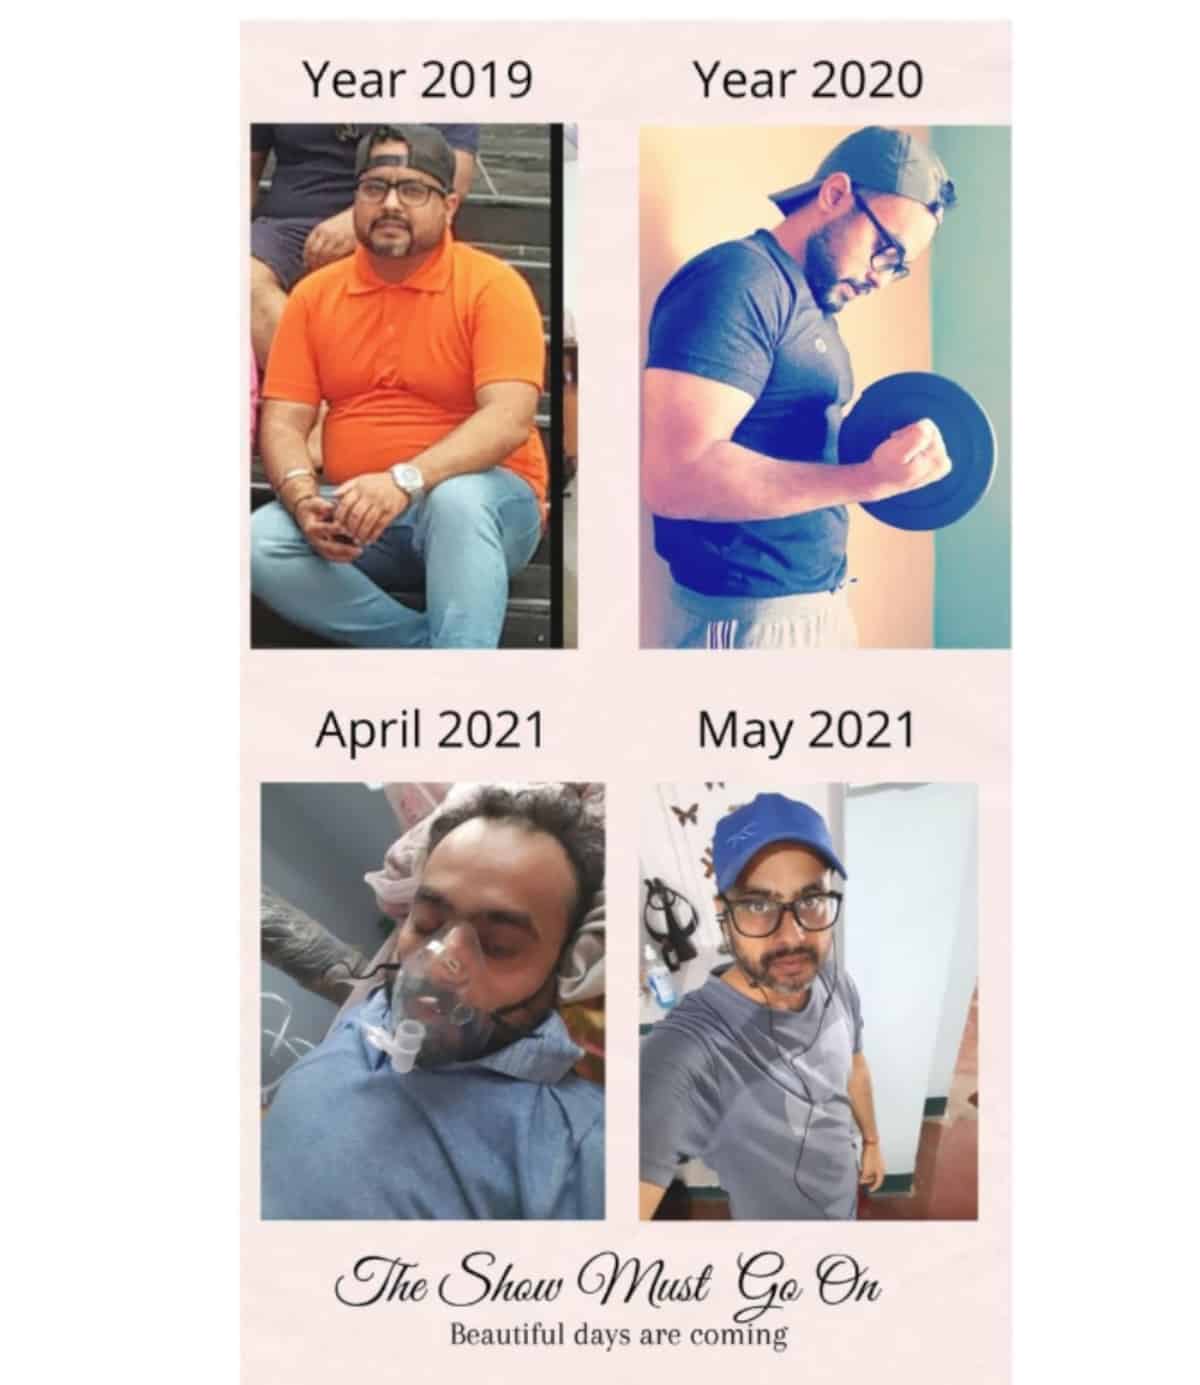 Anubhav's weight loss journey from 2019 to 2021.